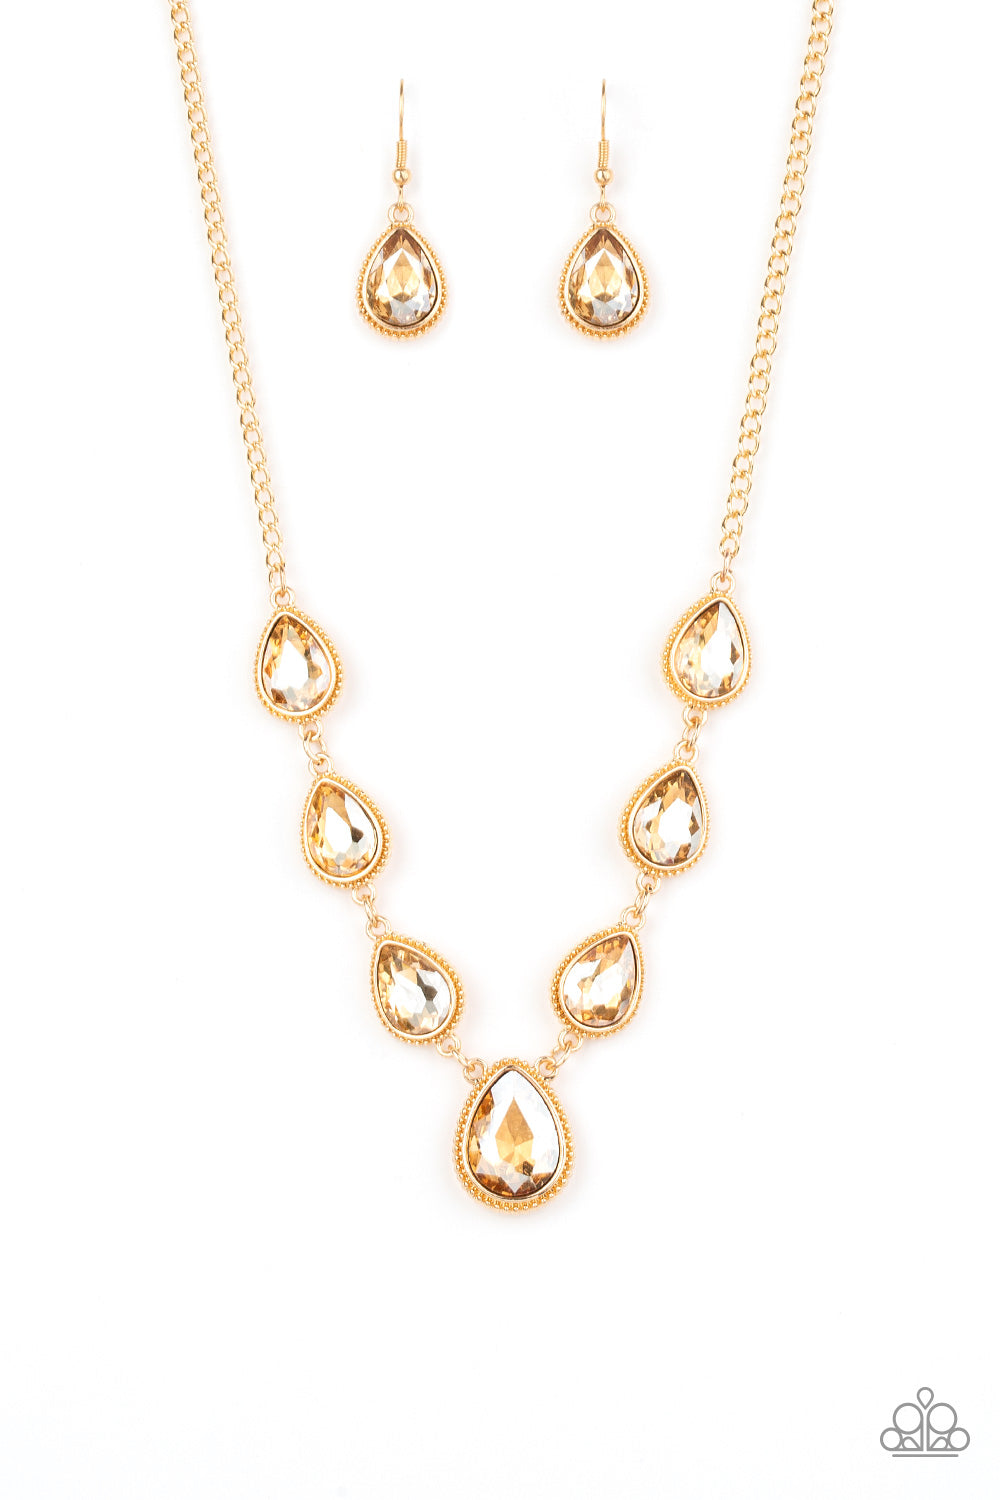 Socialite Social - Gold Necklace - Paparazzi Accessories - Jazzy Jewels With Lady J